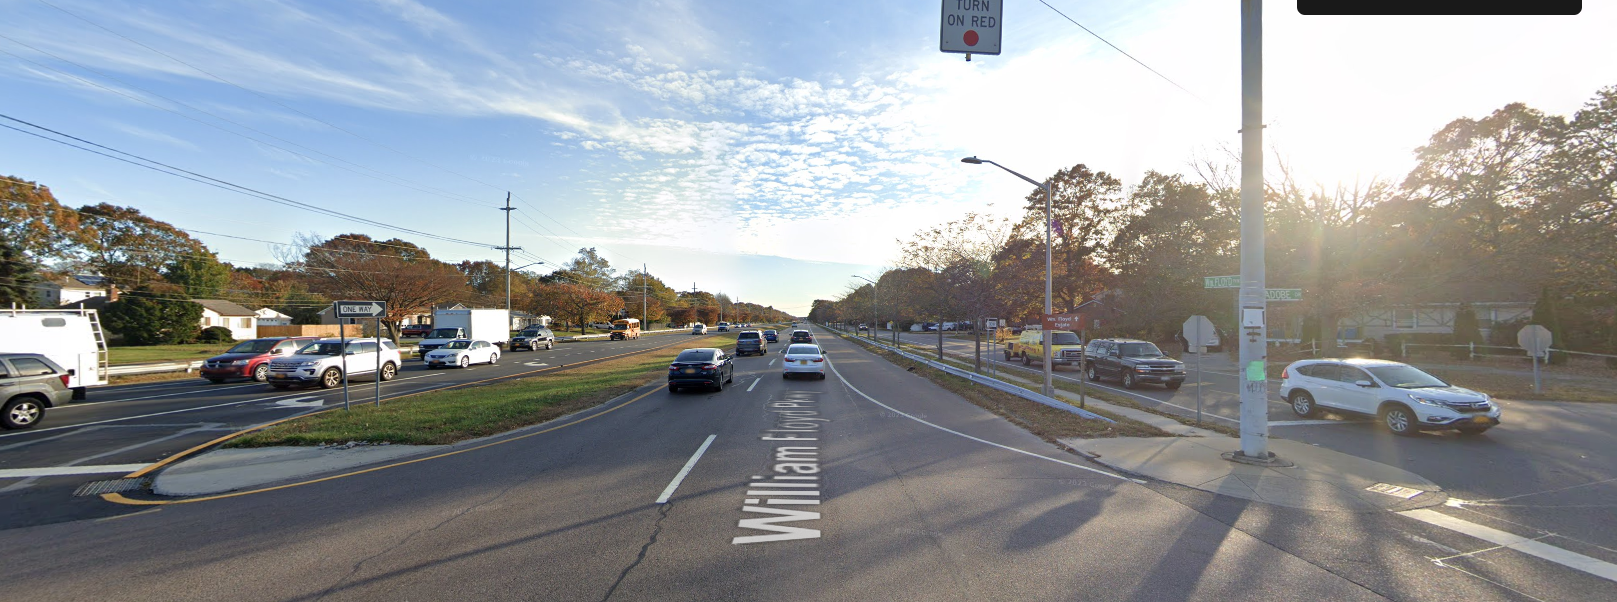 Location of the collision betwen the police car and the cyclist in Long island NY